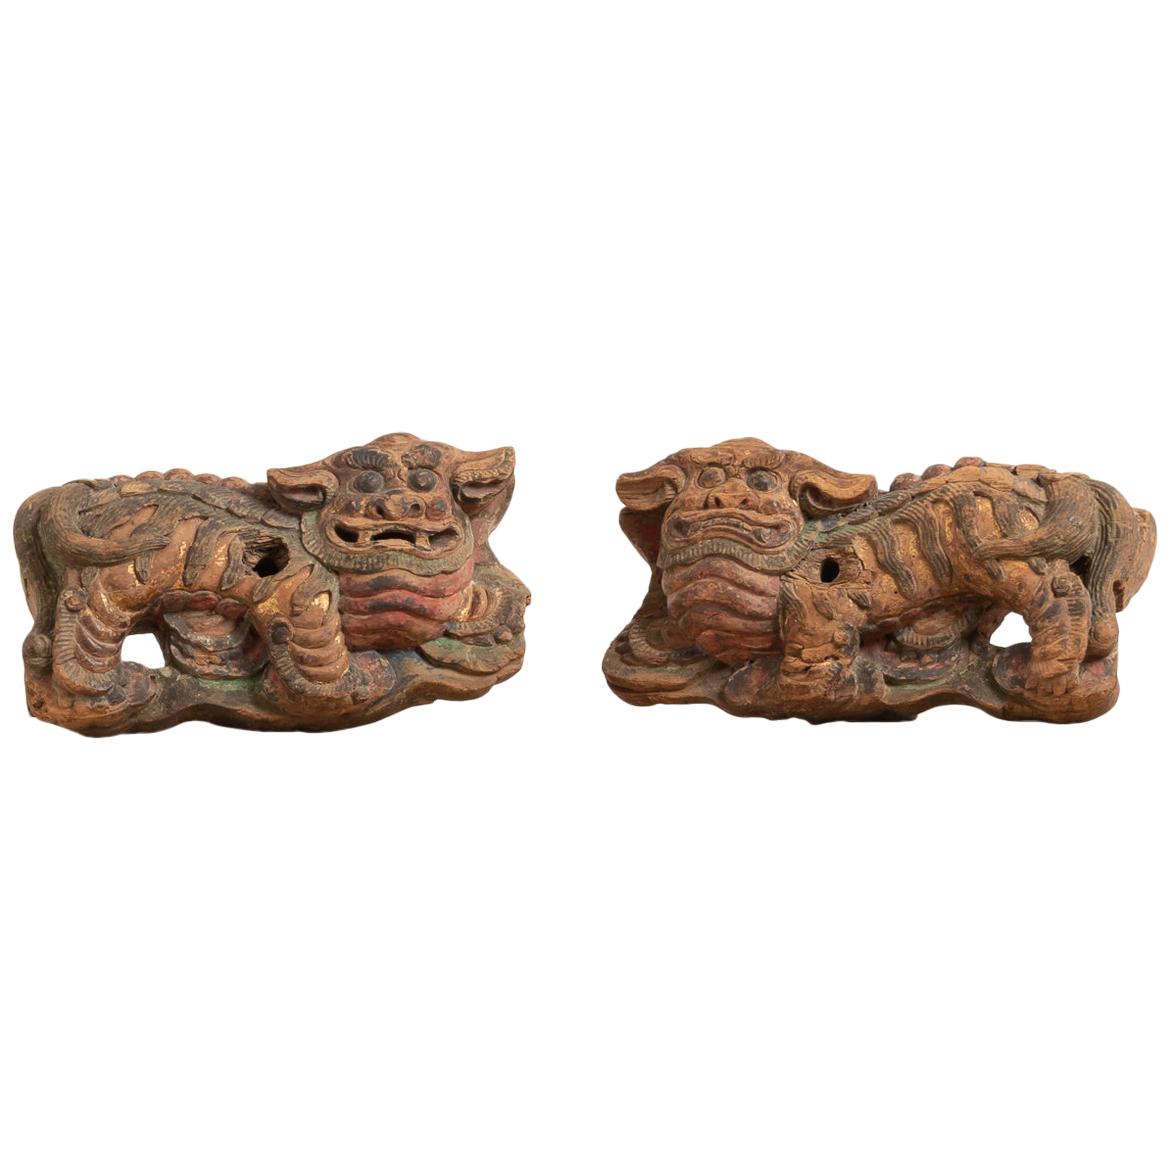 19th Century Chinese Guardian Lions in Original Condition